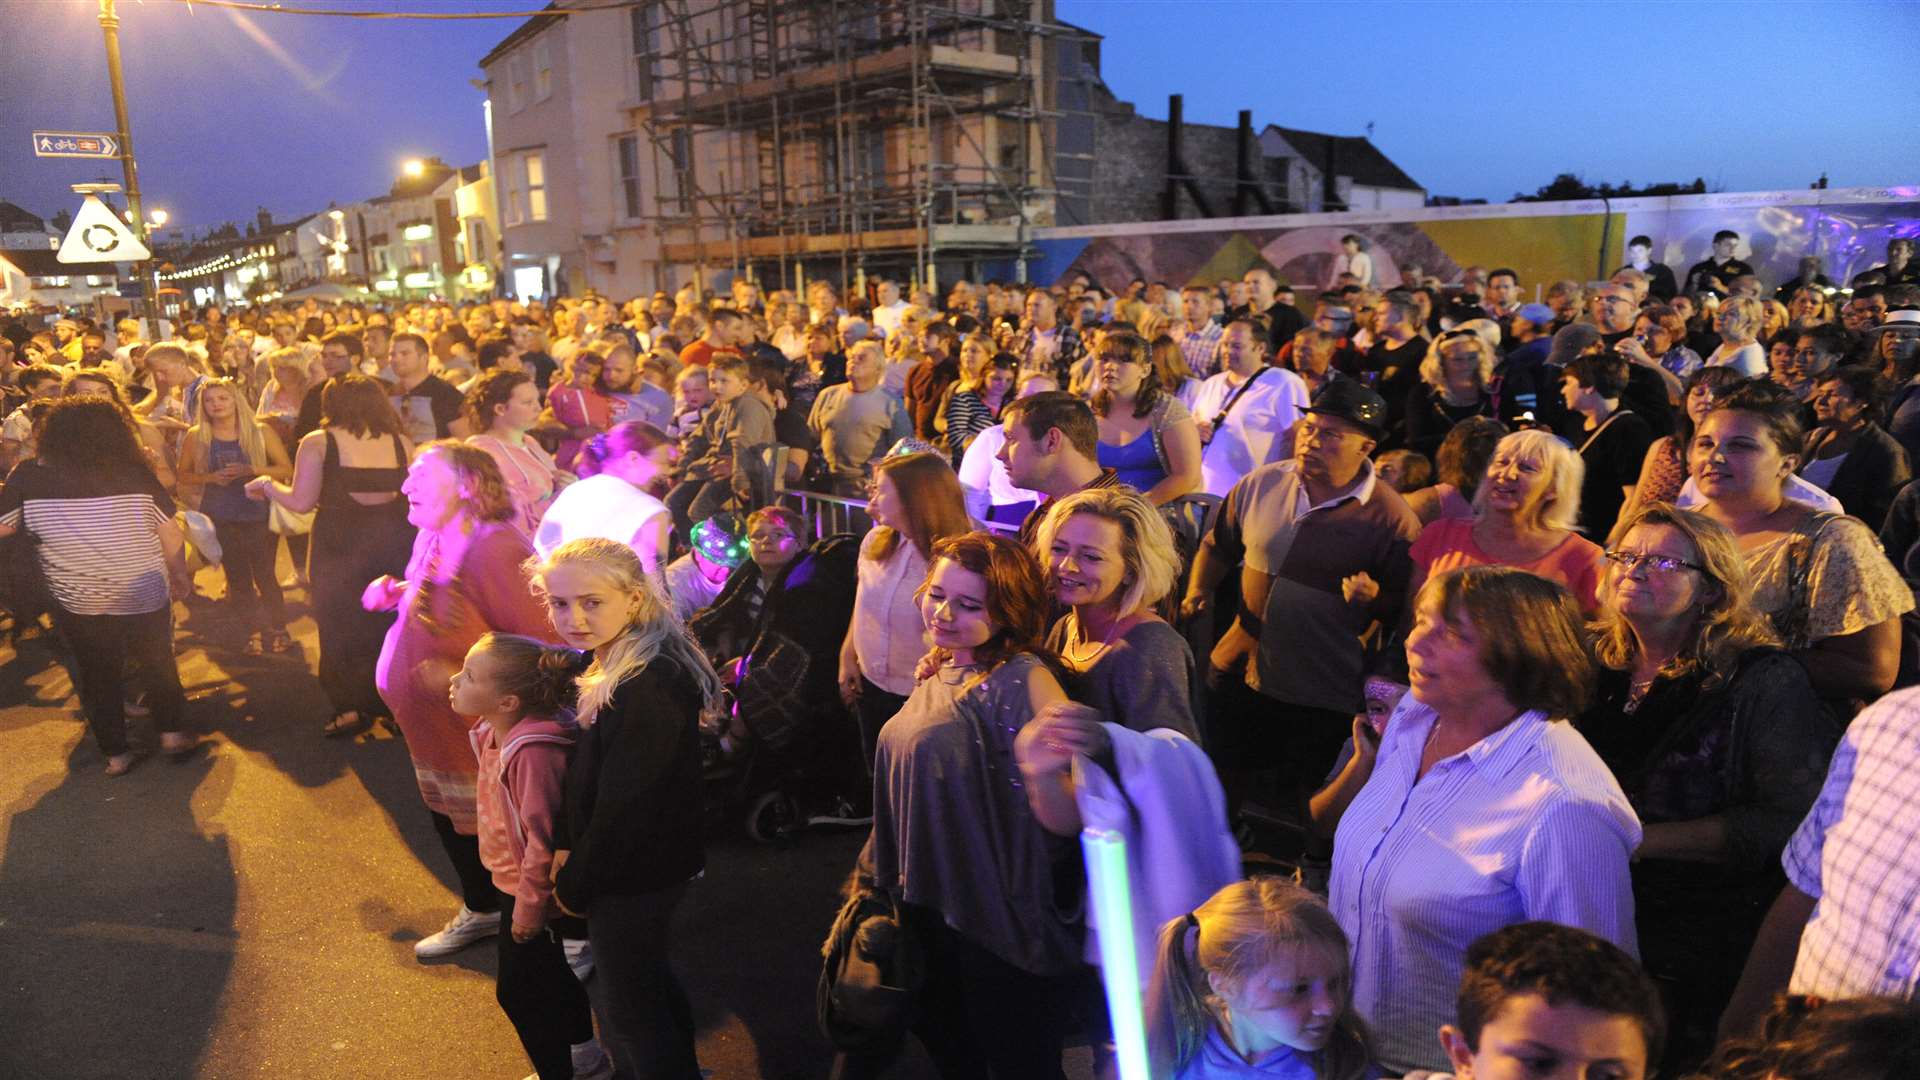 The Party on the Prom - one of Deal's premier events